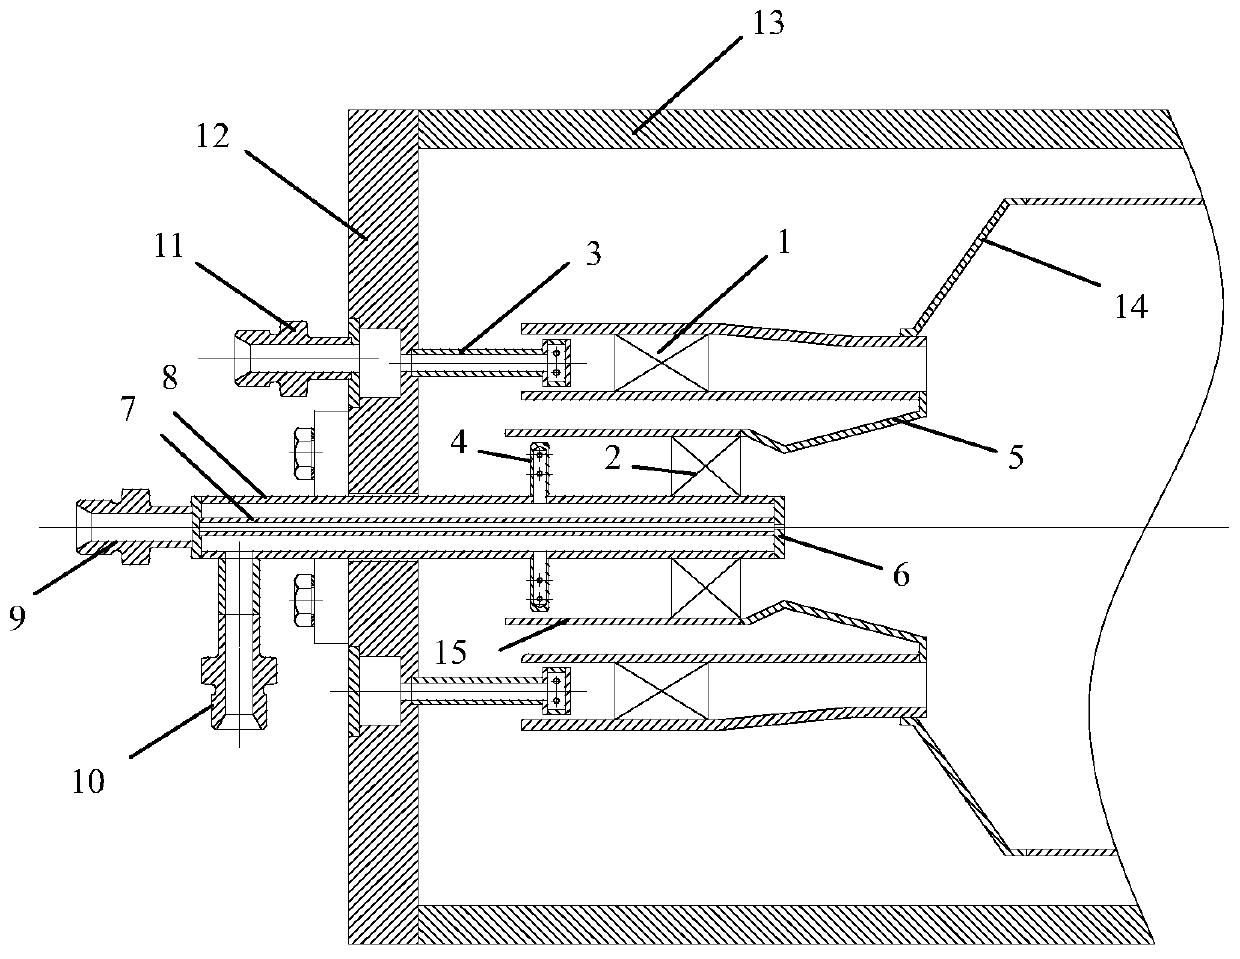 Combustion chamber combustor of gas turbine